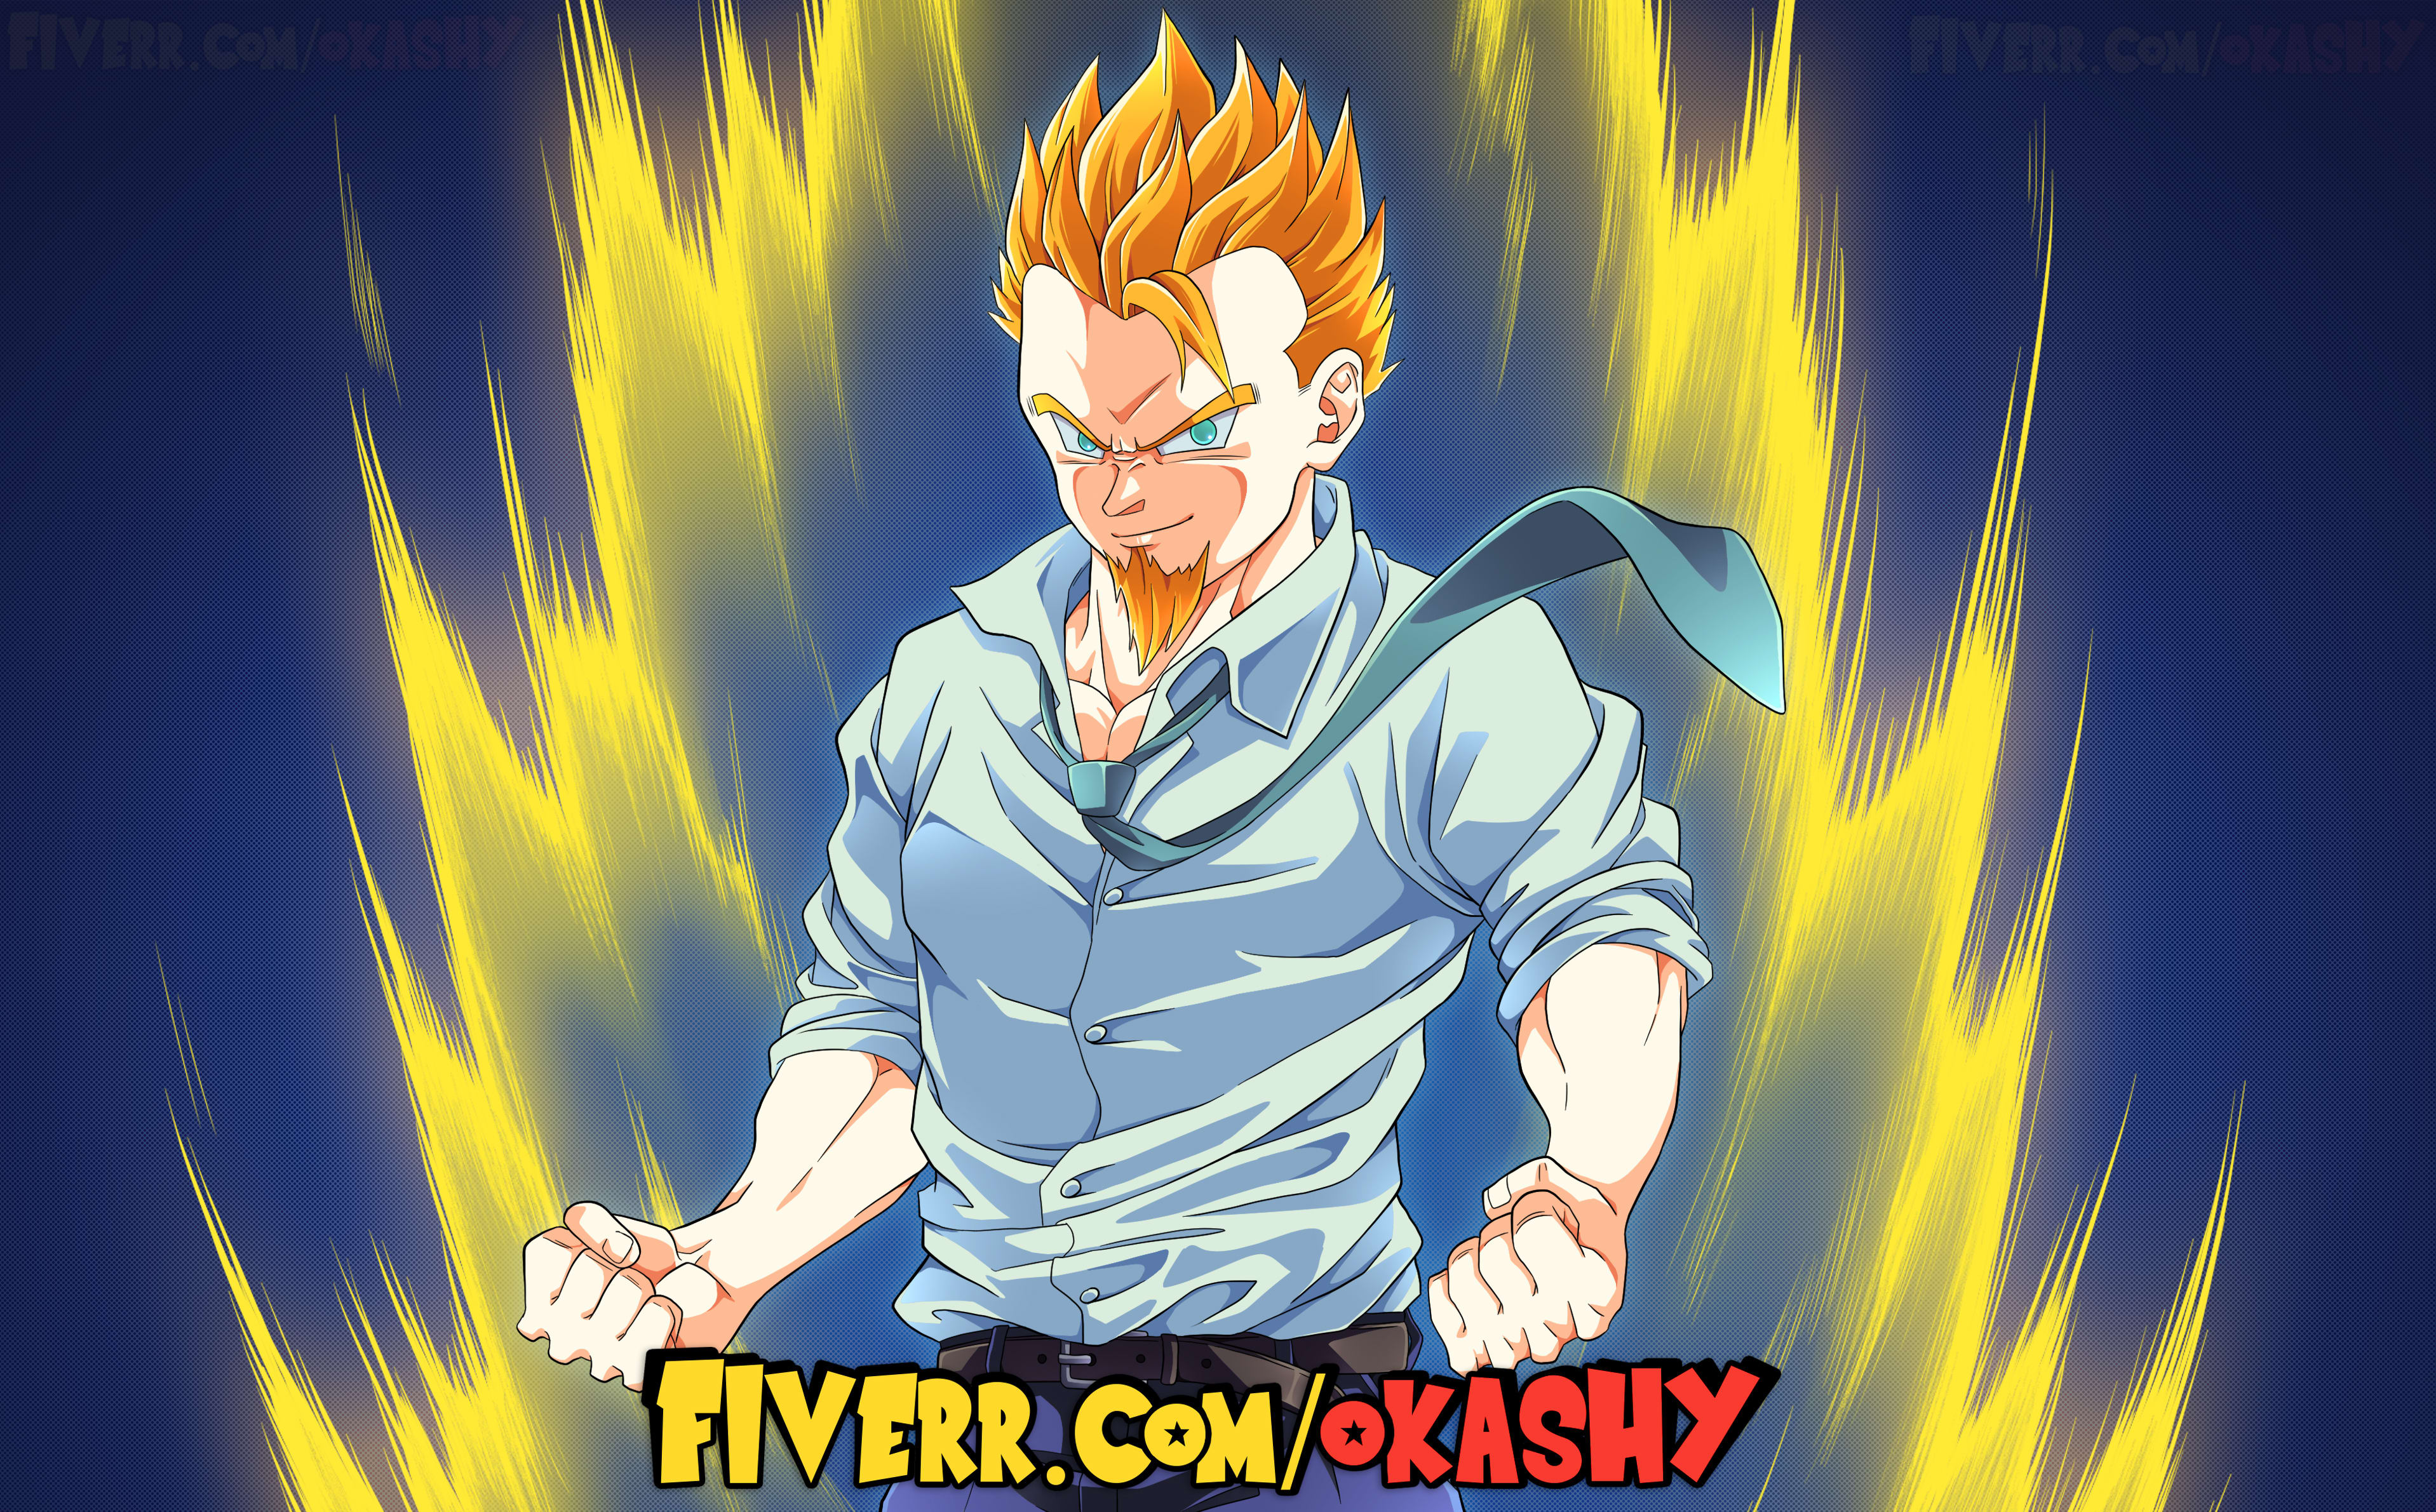 With the Vegeta Wallpapers released last month by the official DB twitter,  I made one in a similar style for Future Trunks : r/dbz